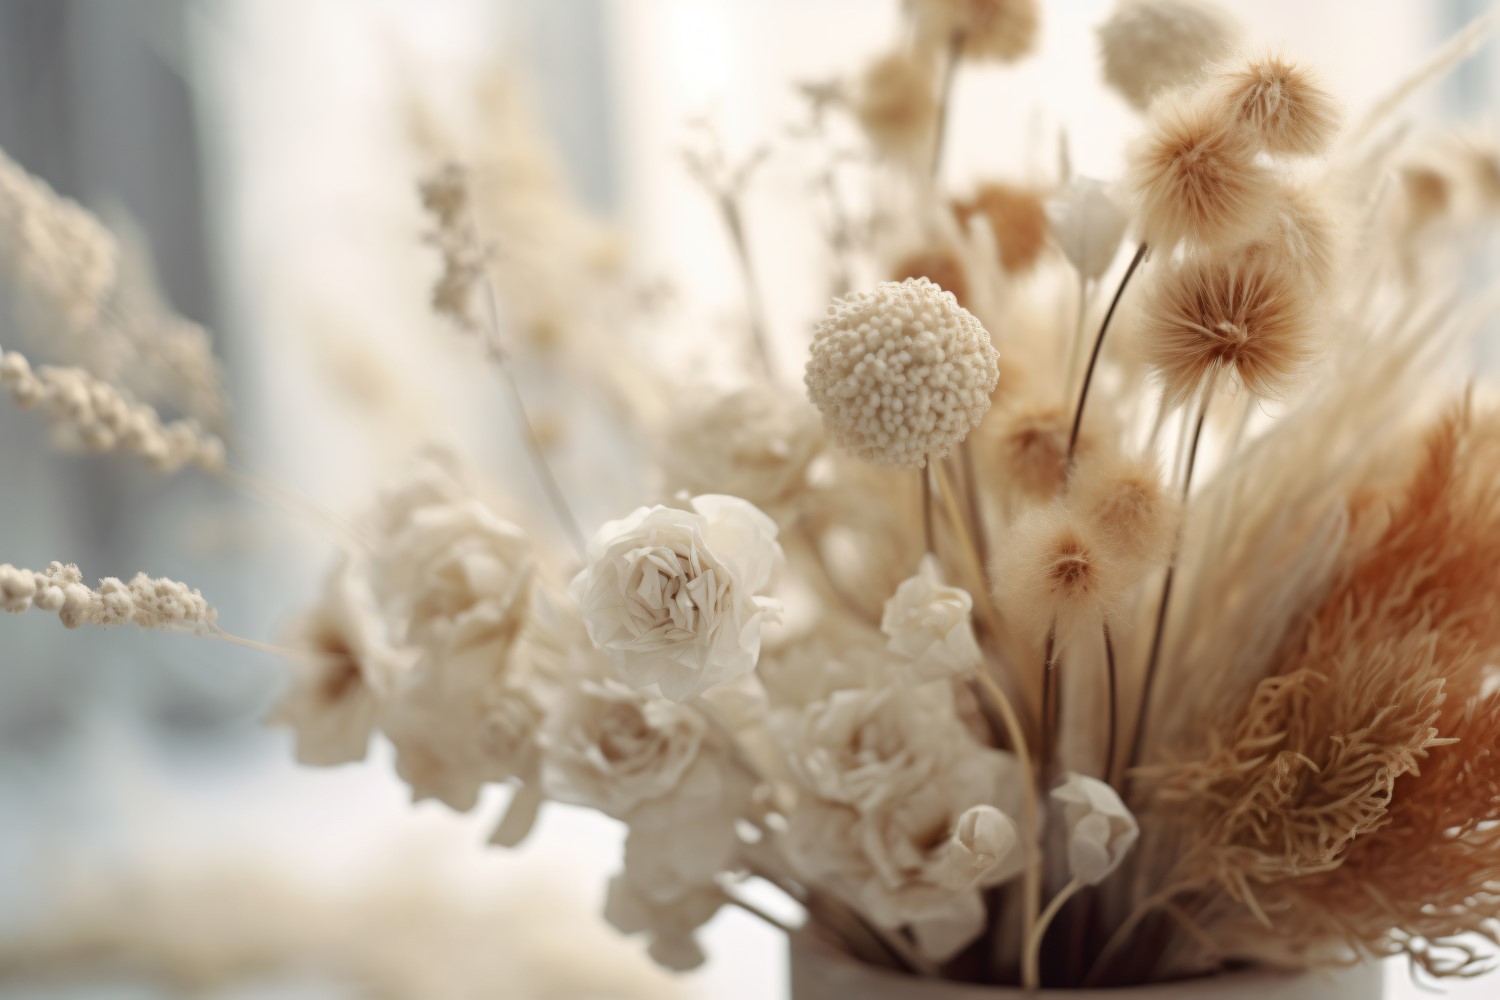 Dried Flowers Still Life White Flora 64